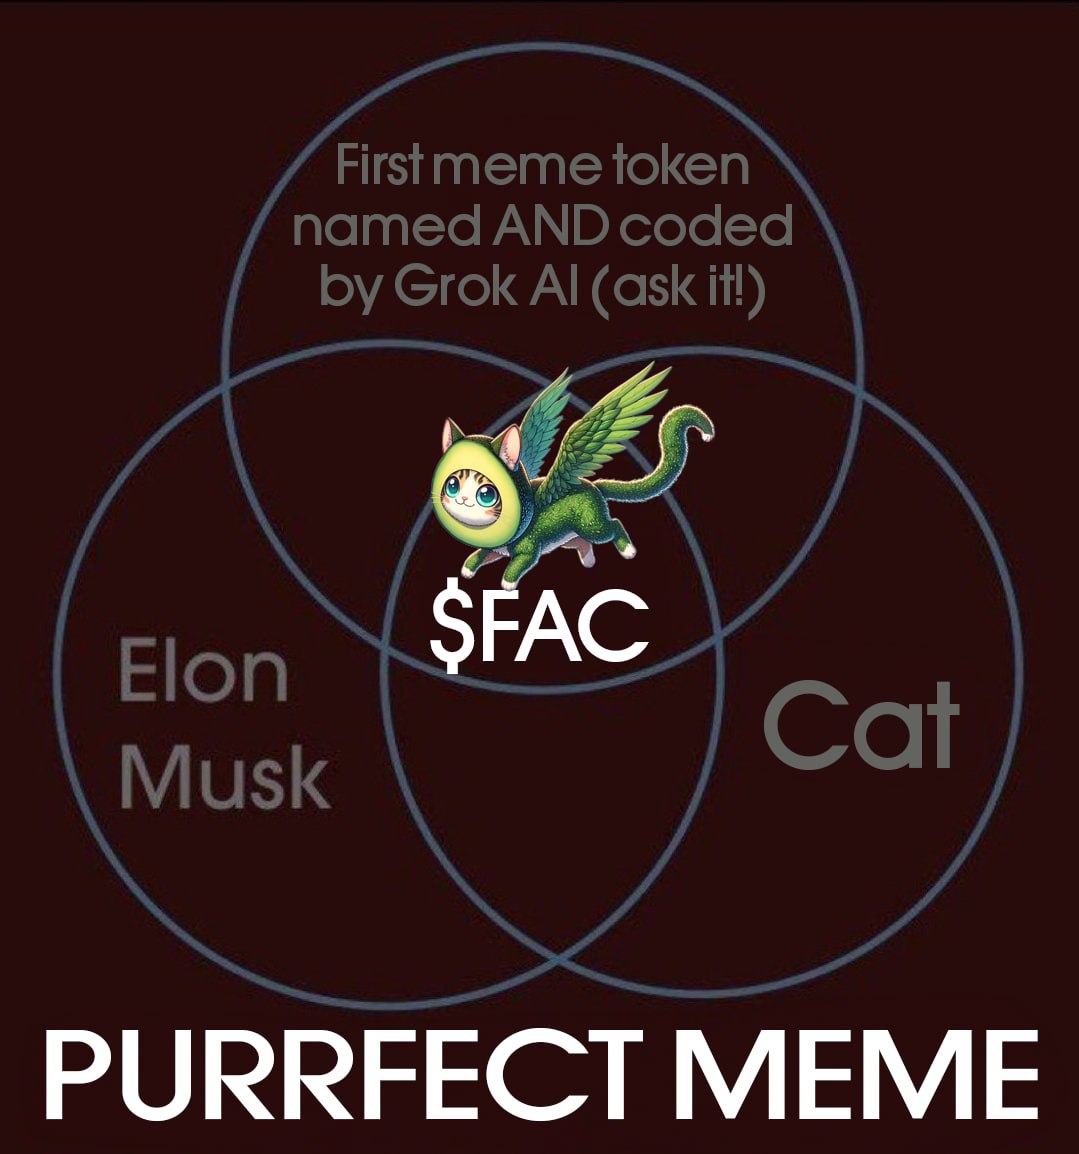 @Wahgmi #FlyingAvocadoCat
Memes, laughs we don't $FAC'n stop 
Constant raids and big news that's been dropped 
100x on this token minimum  
Ai is the future! 🪽🥑🐱